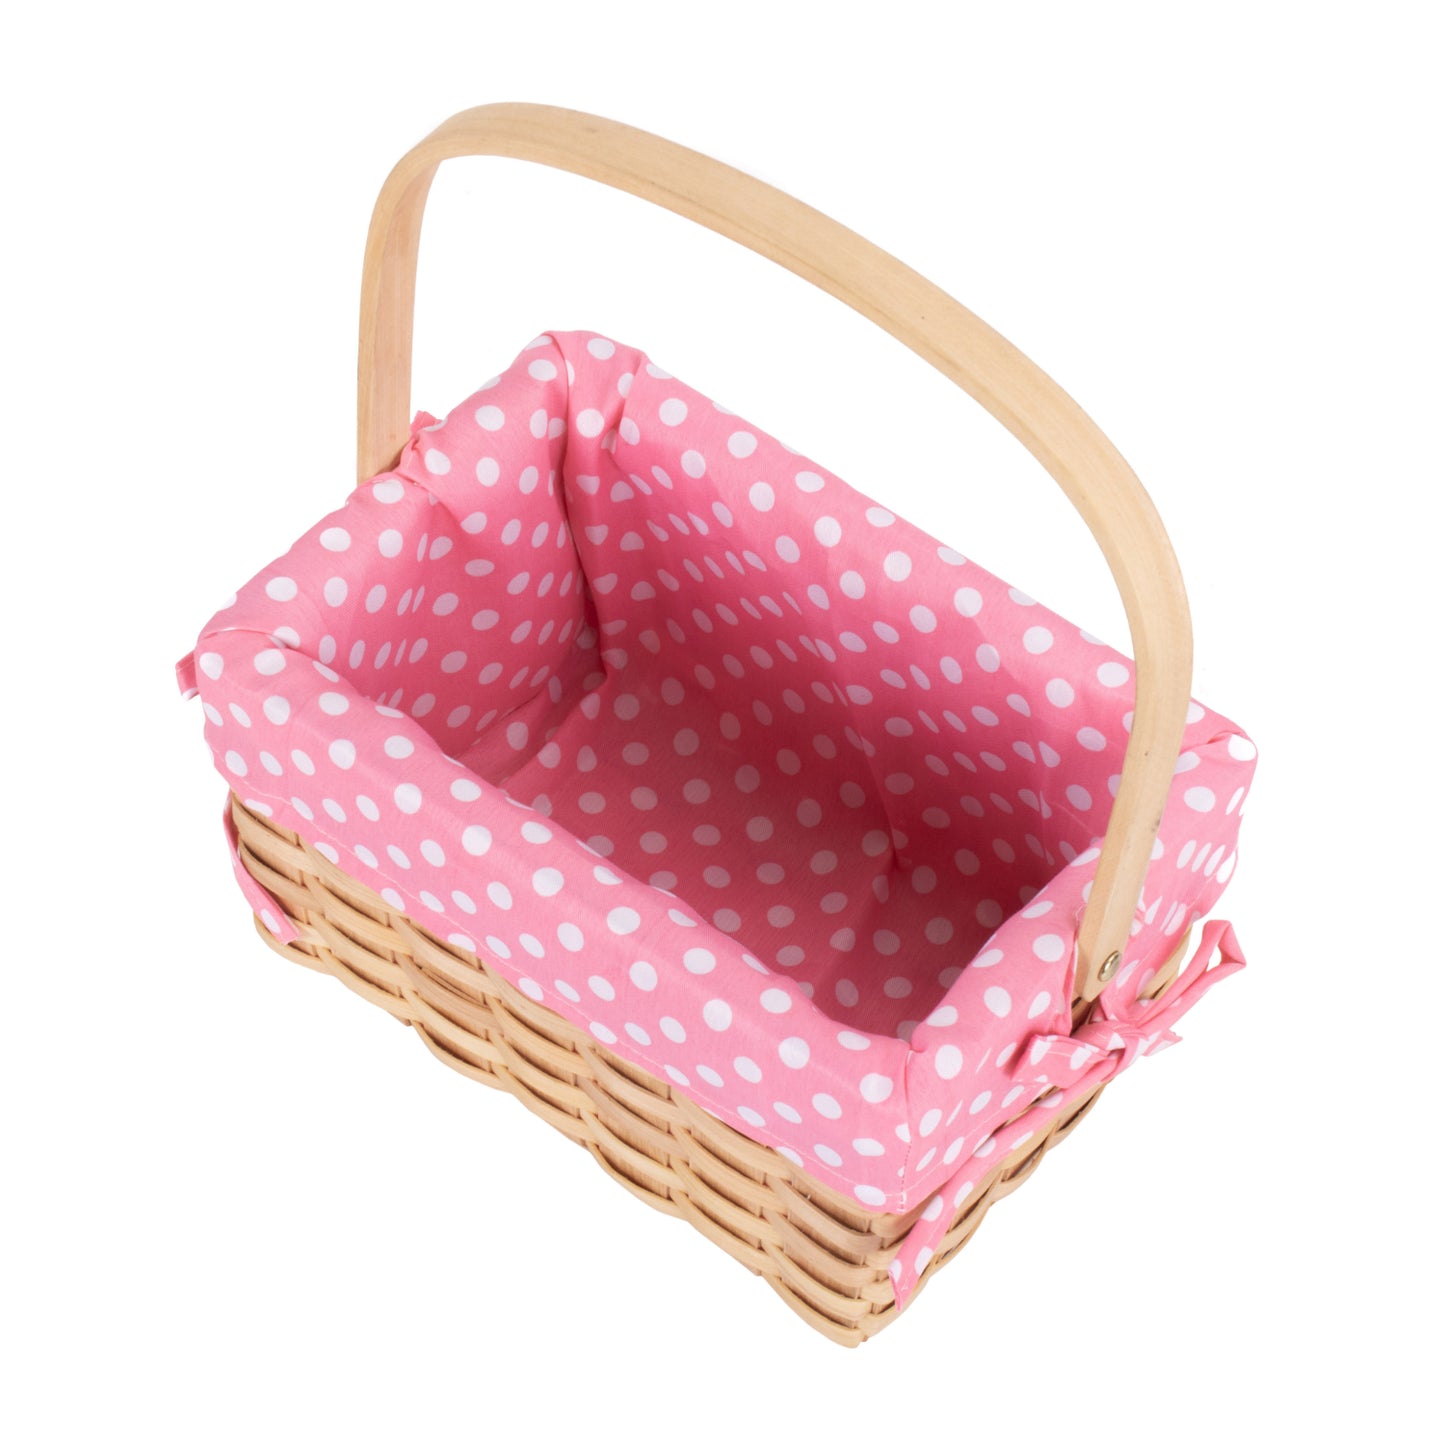 Chipwood Swing Handle Basket With Pink Lining